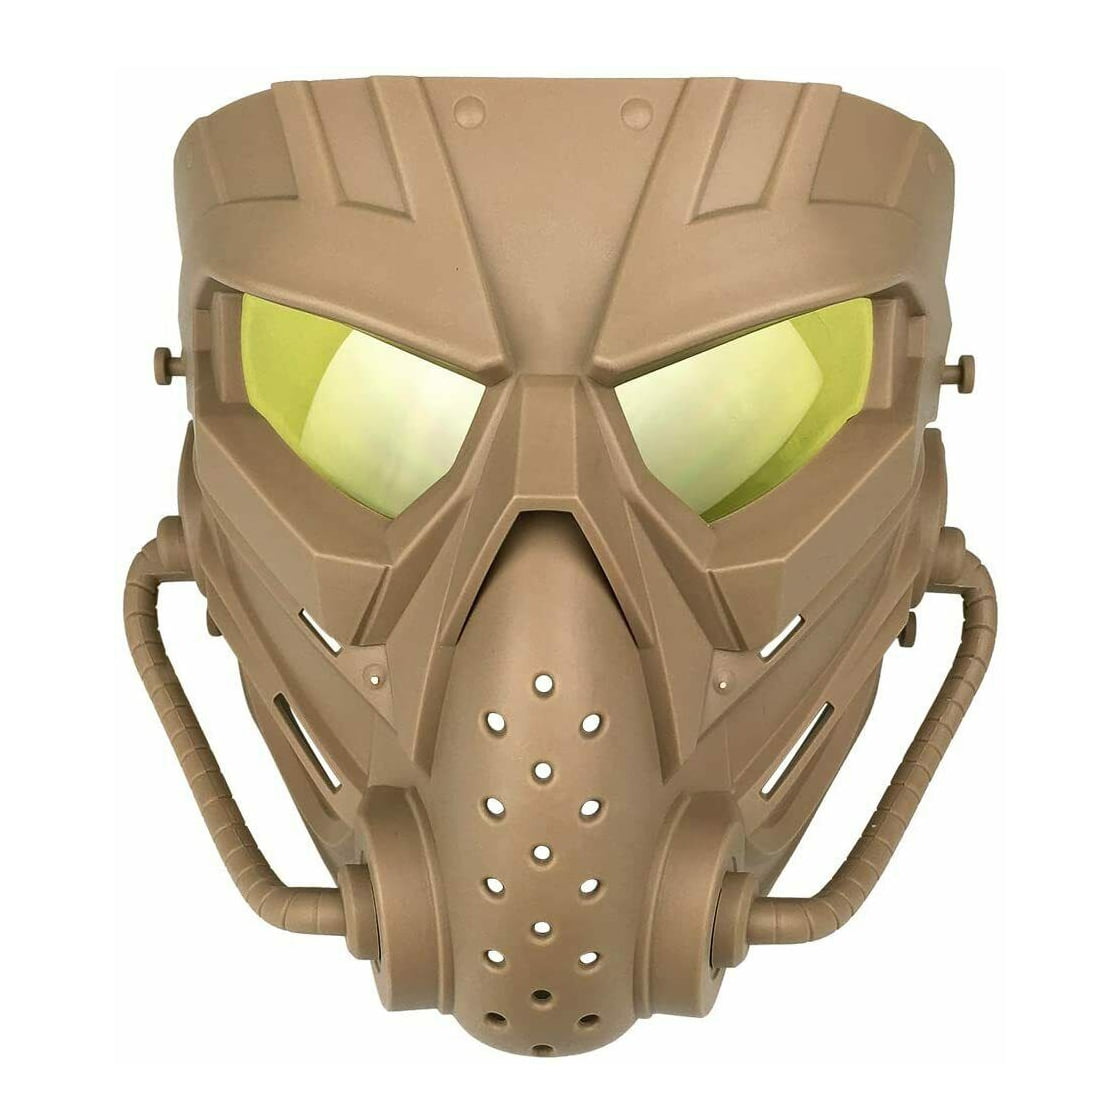 Hunting Full Face Protective Mask Goggle Tactical Airsoft Helmet Military WAR 